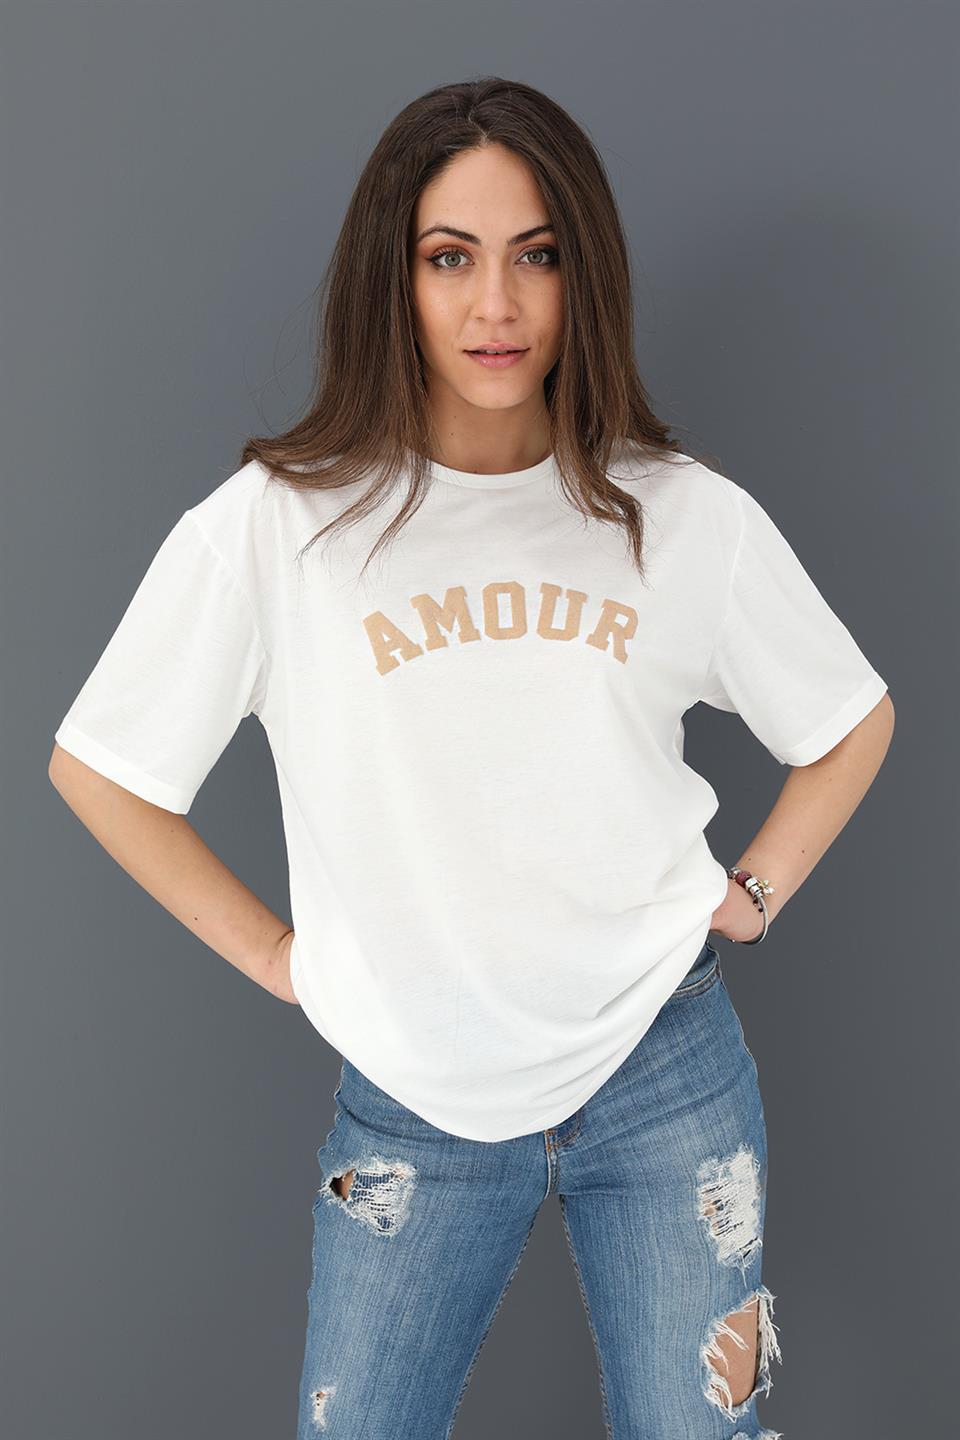 Women's T-shirt Crew Neck Amour Printed - Beige - STREETMODE ™